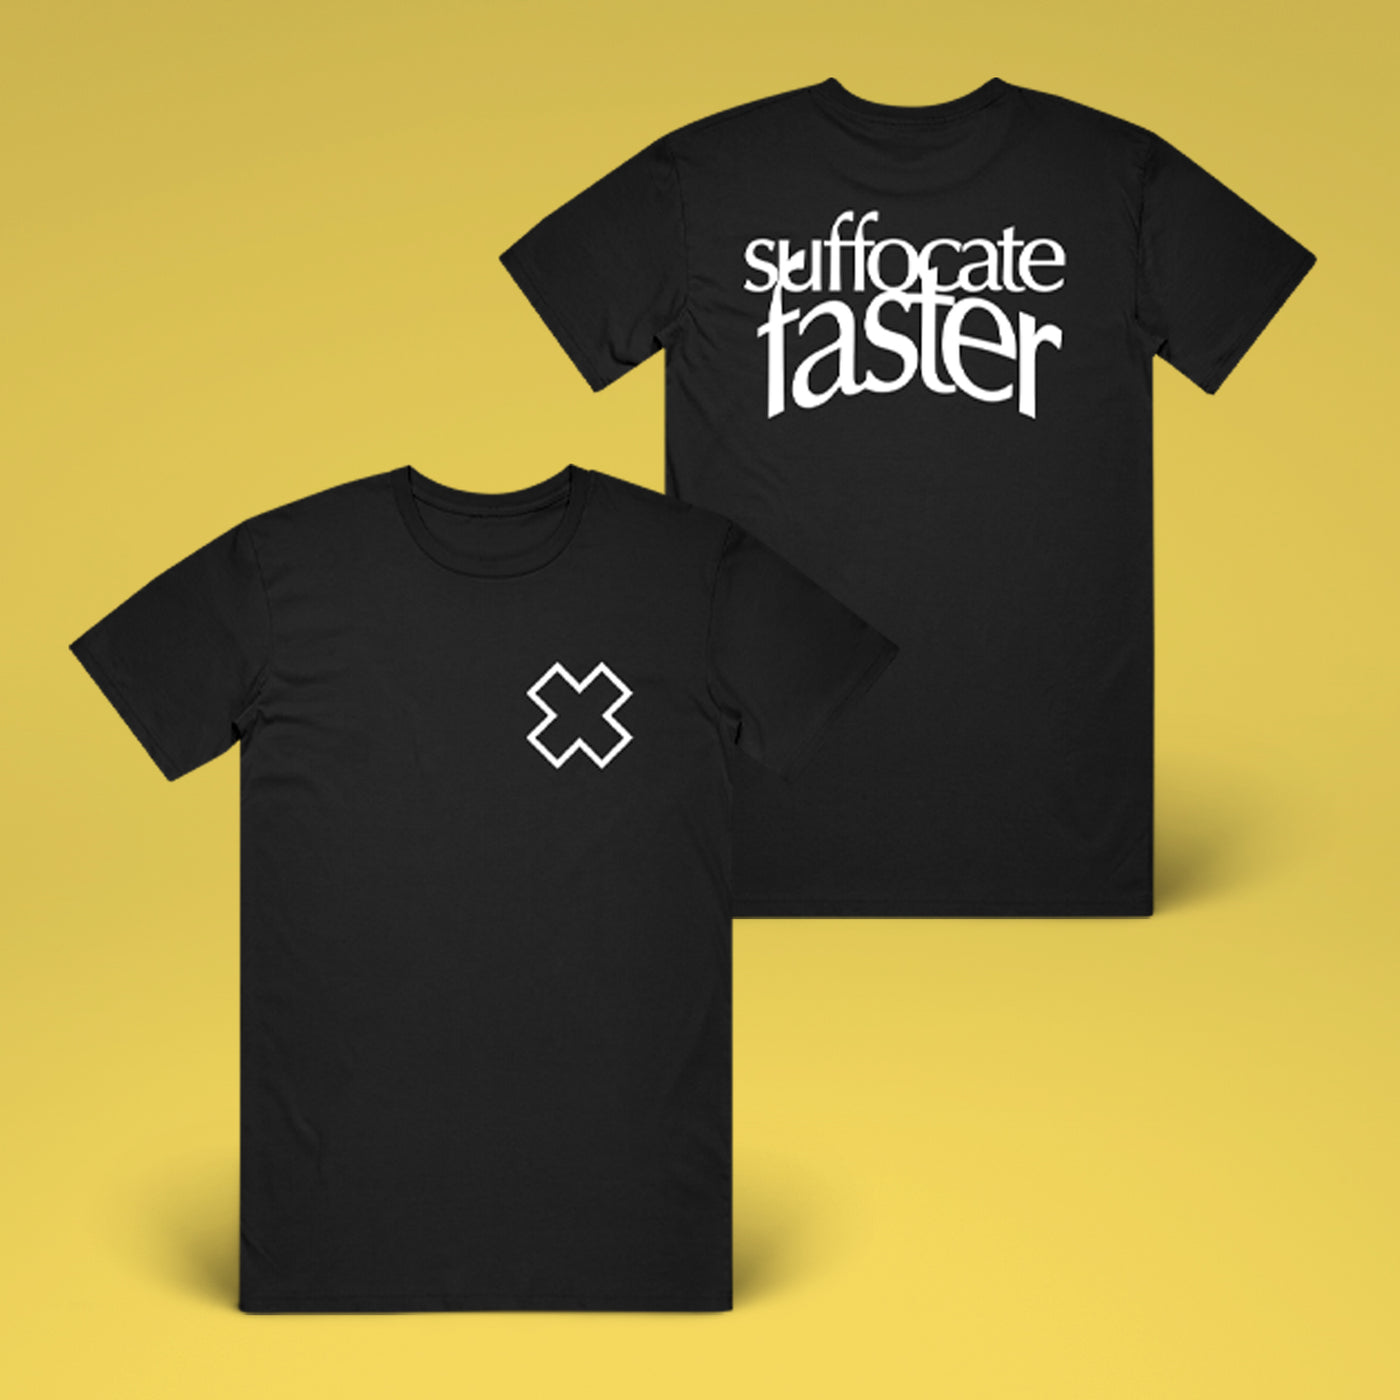 Suffocate Faster - This Is The Way Shirt